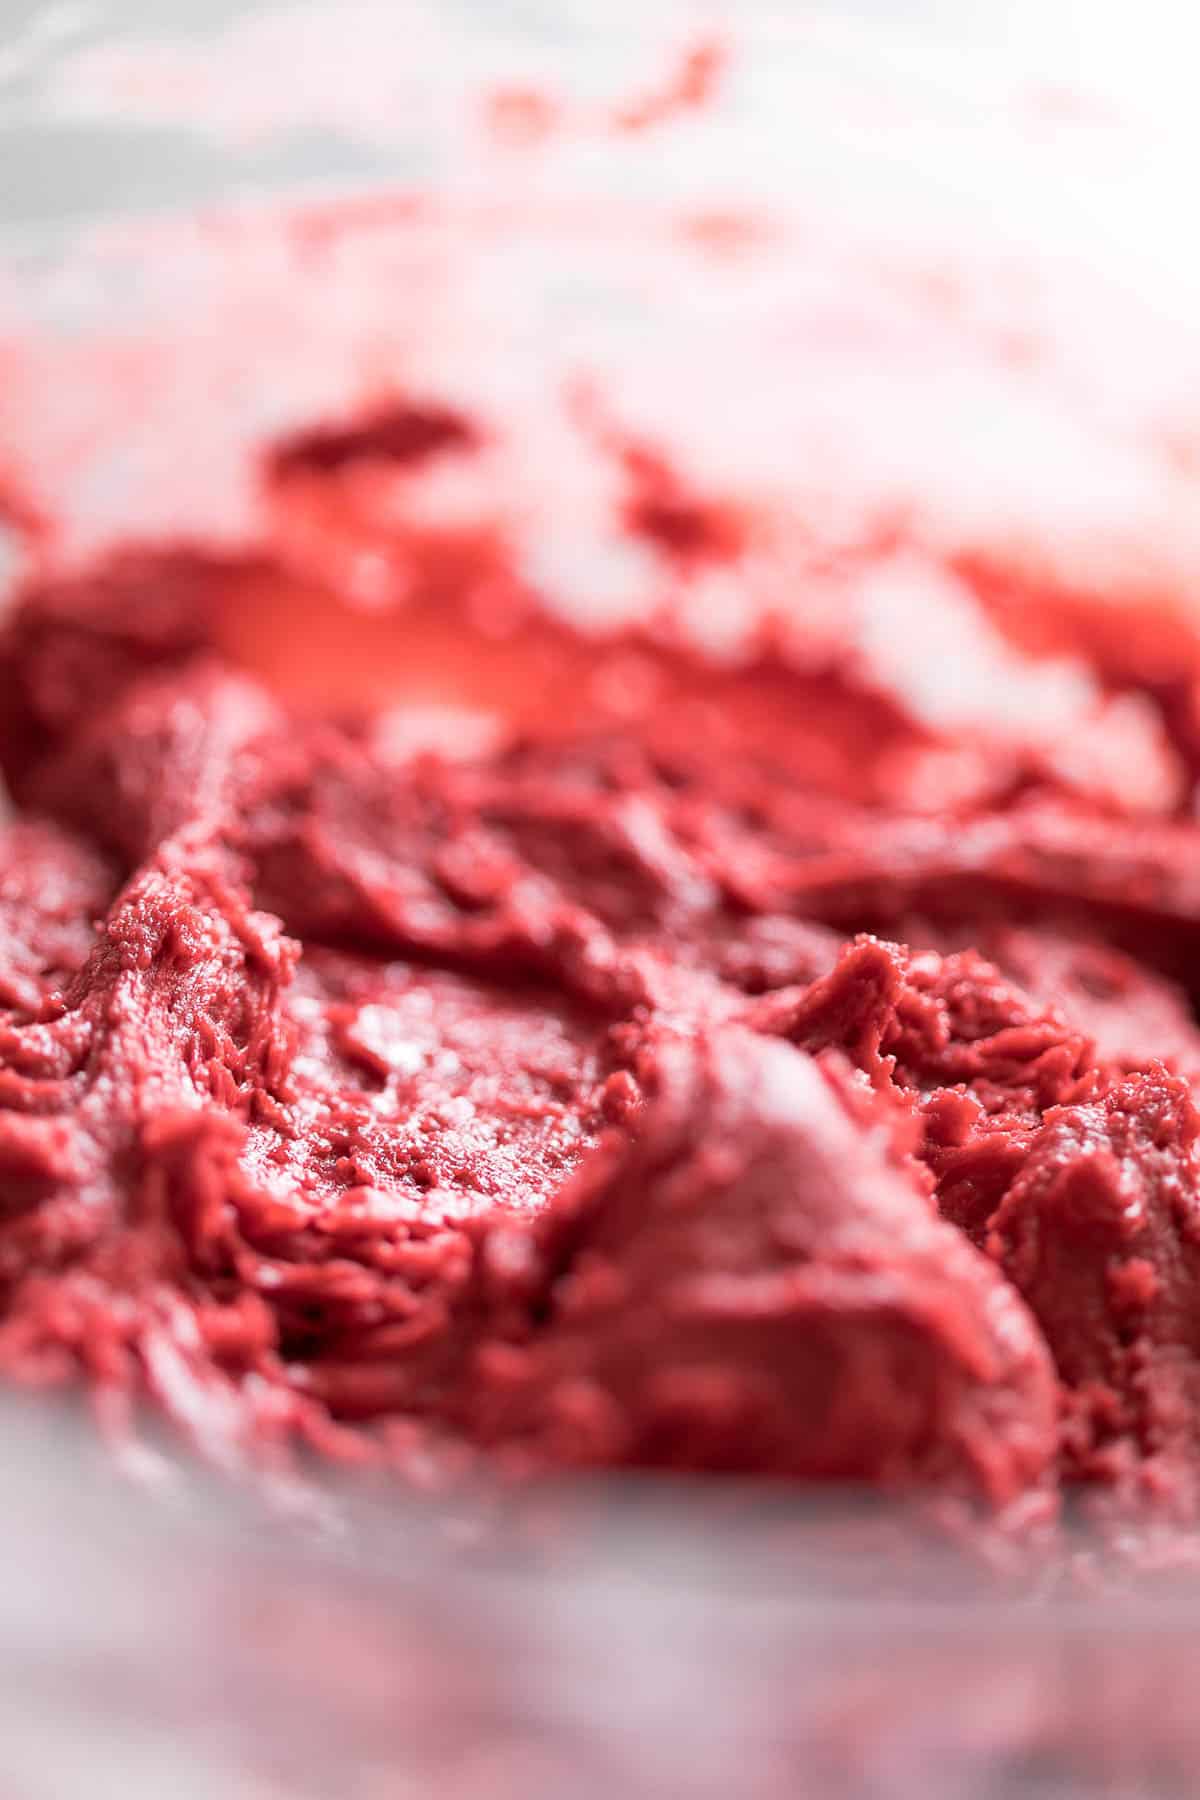 The red velvet cookie dough - in all its glory!